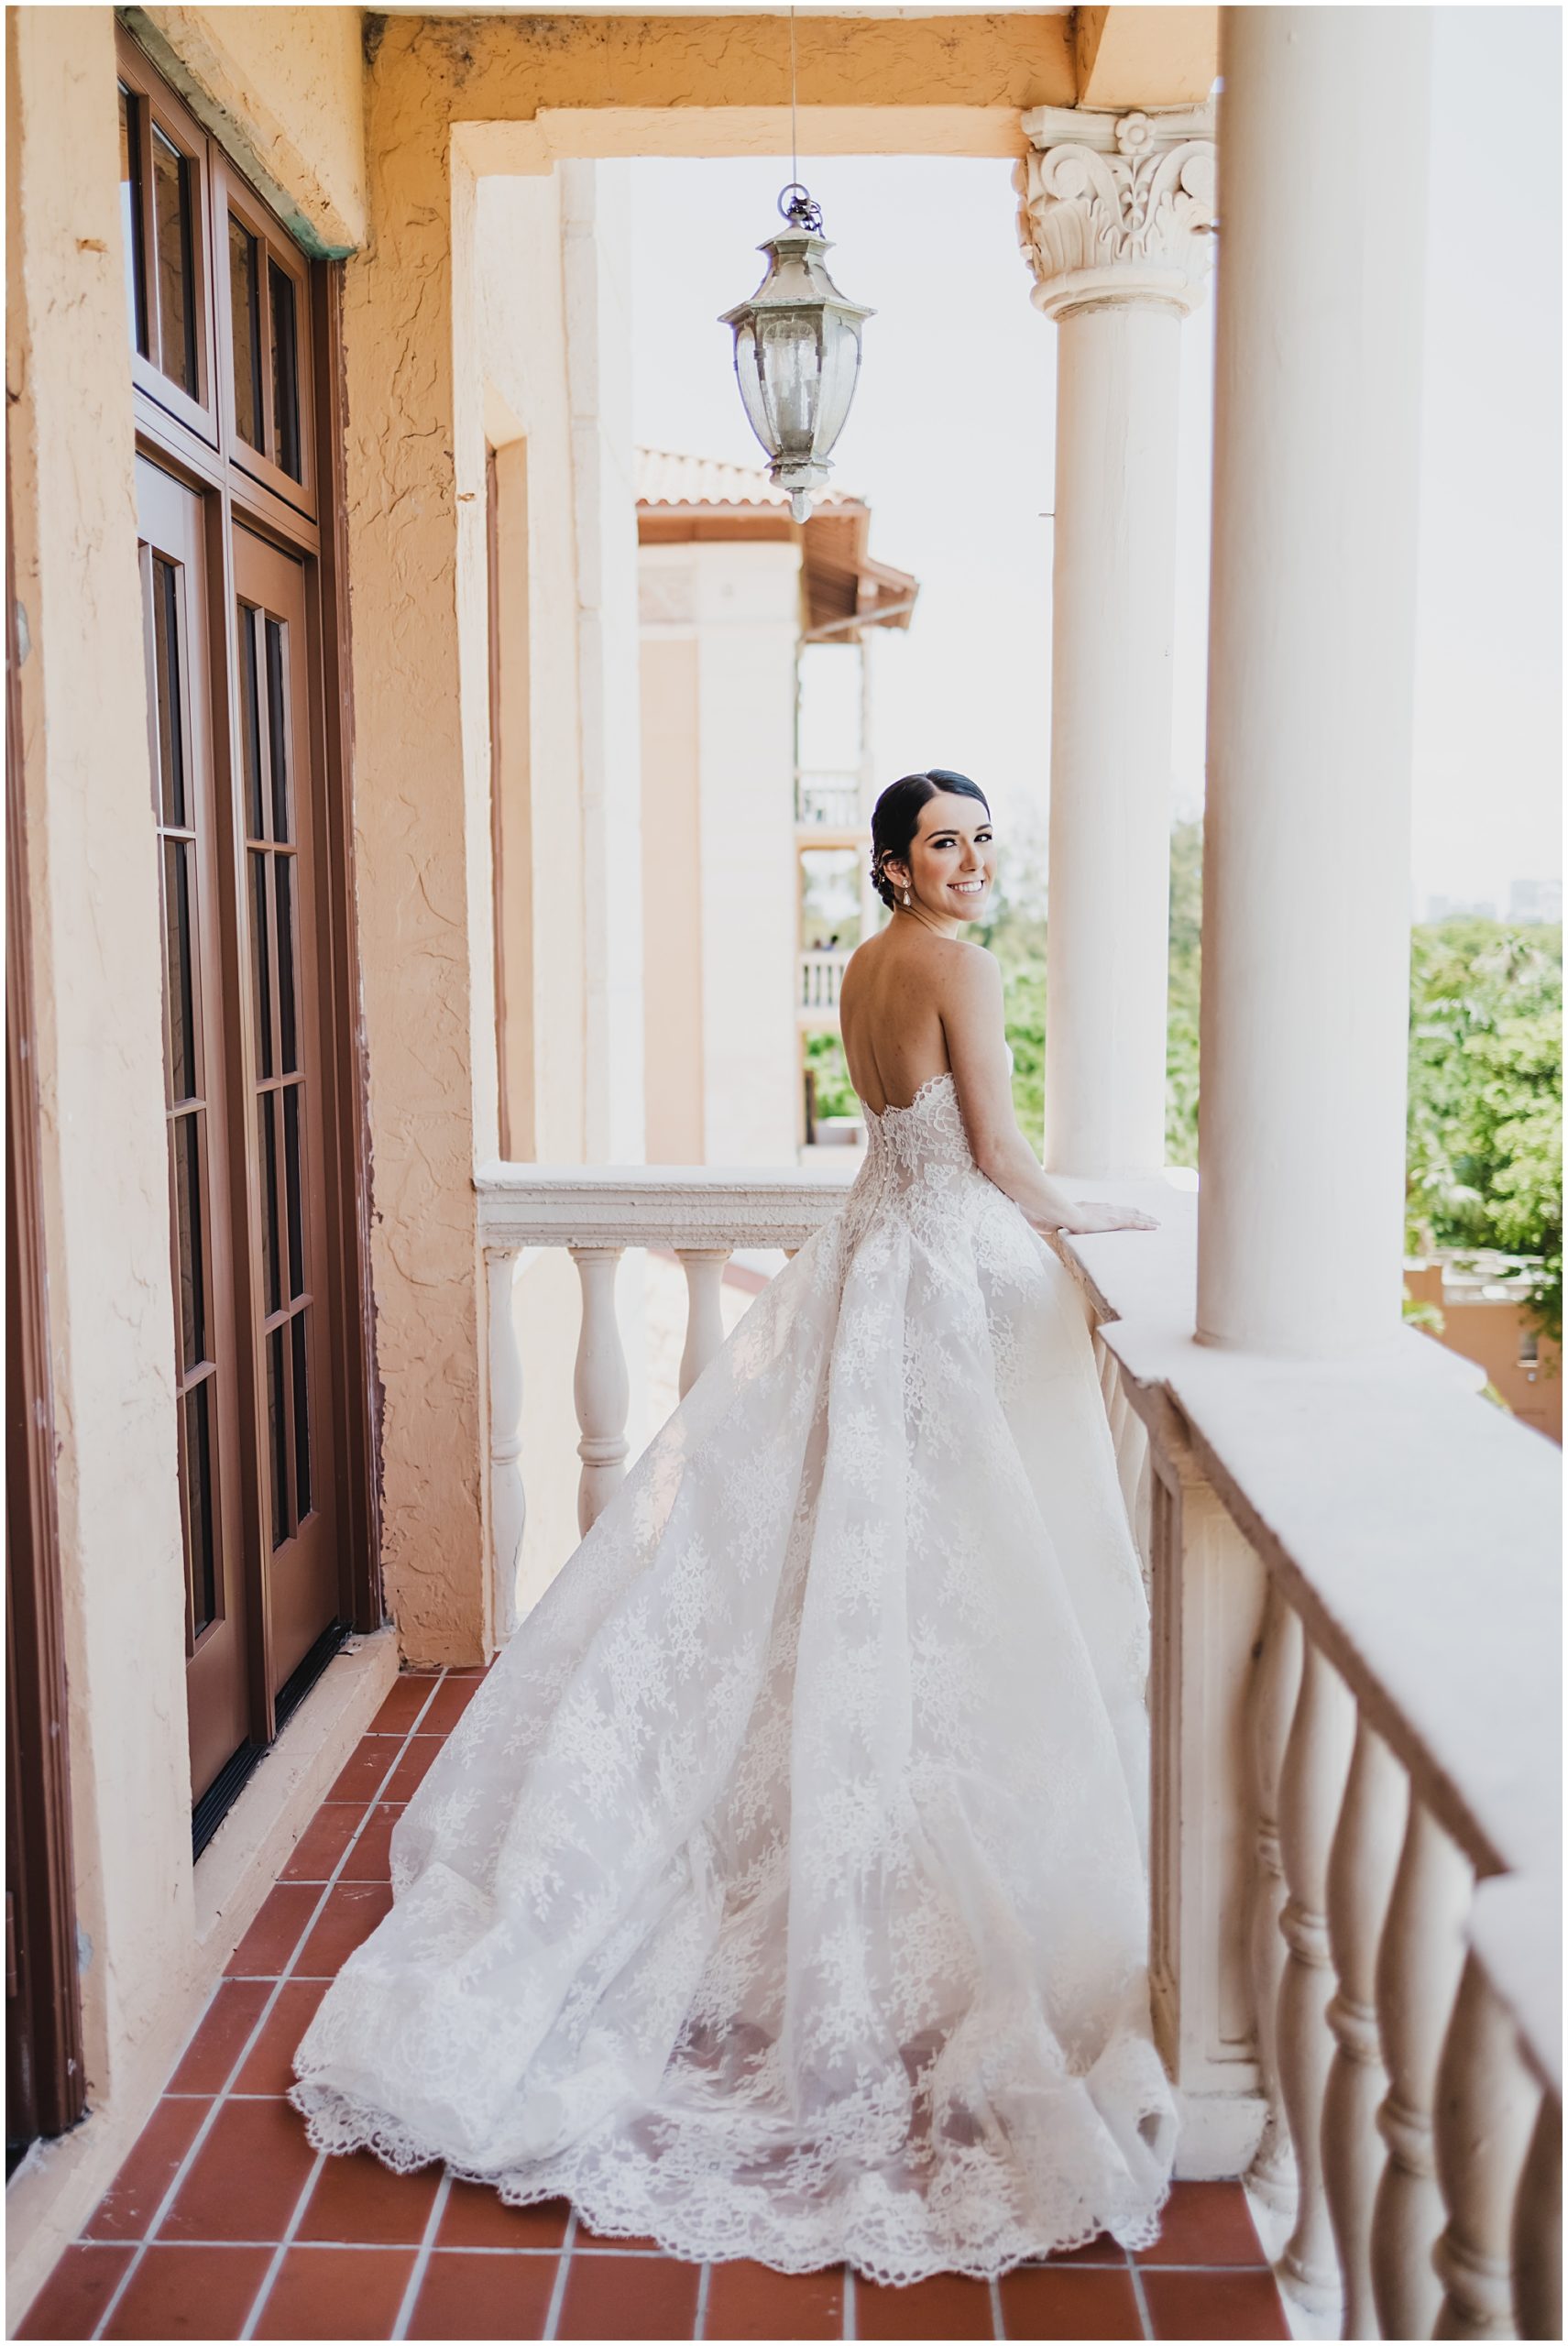 Bride overlooking the golf course from her balcony at the Biltmore Hotel in Coral gables.